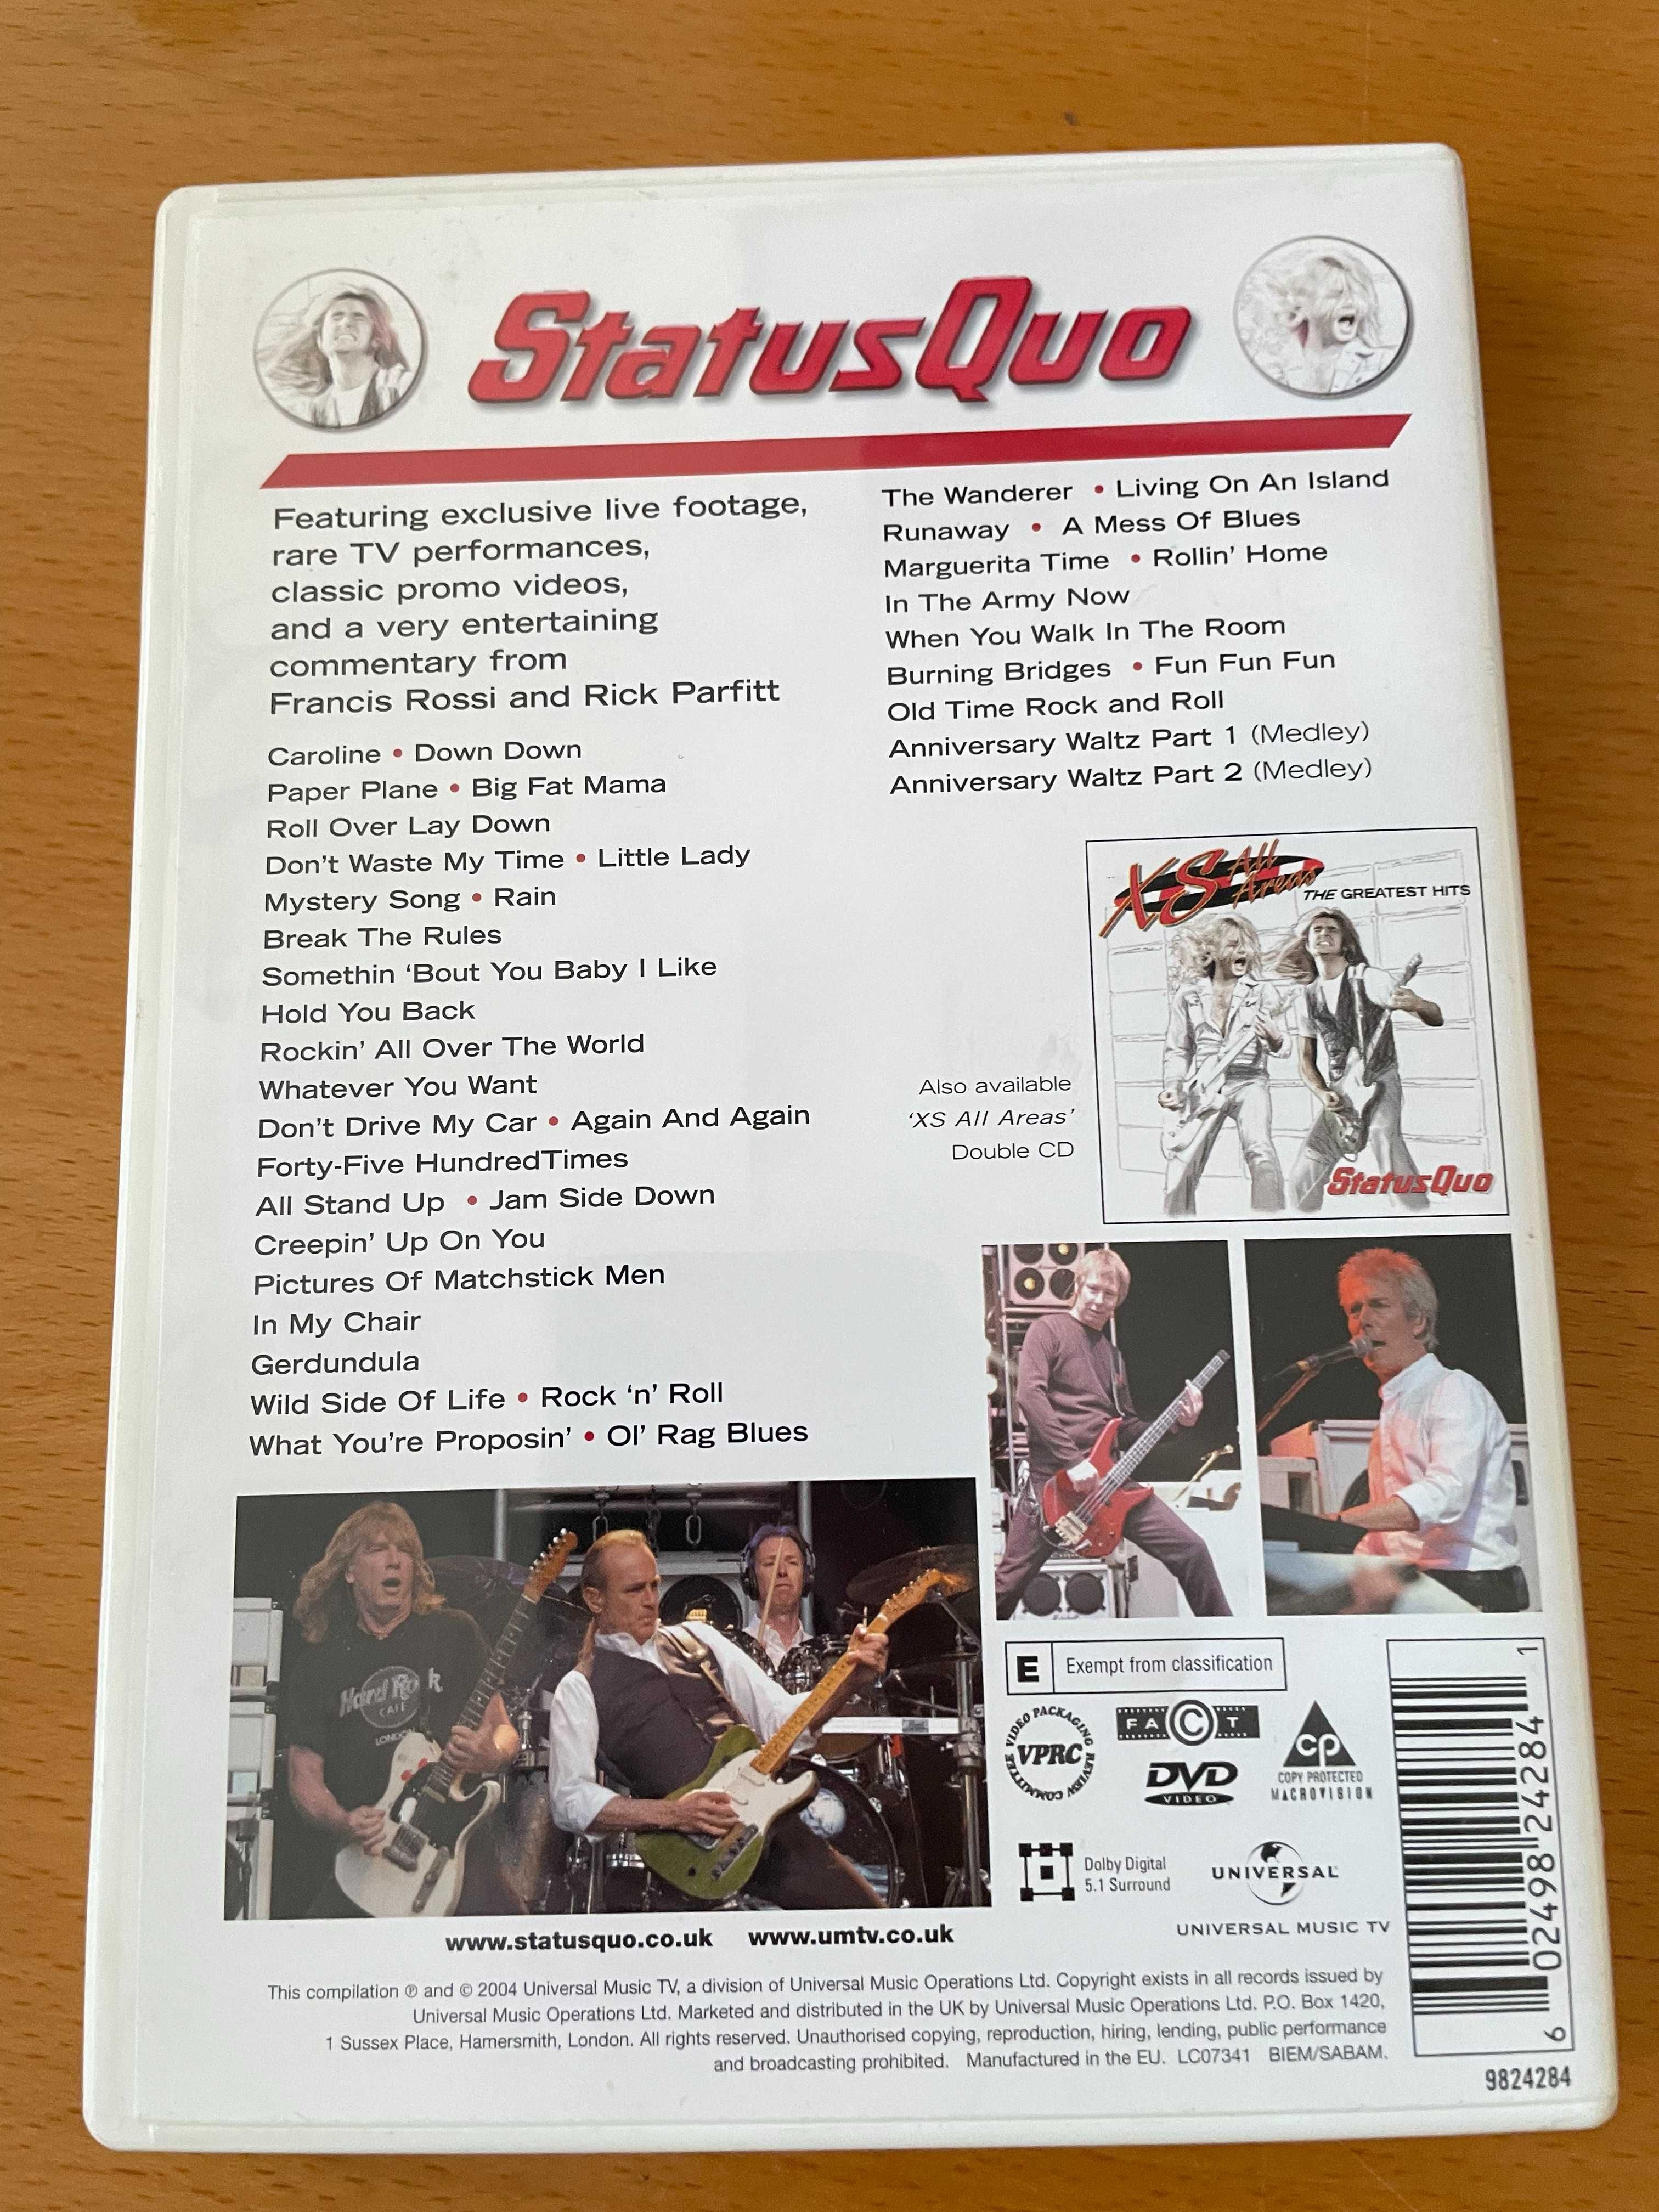 Koncert Status Quo: Xs All Areas The Greatest Hits płyta DVD